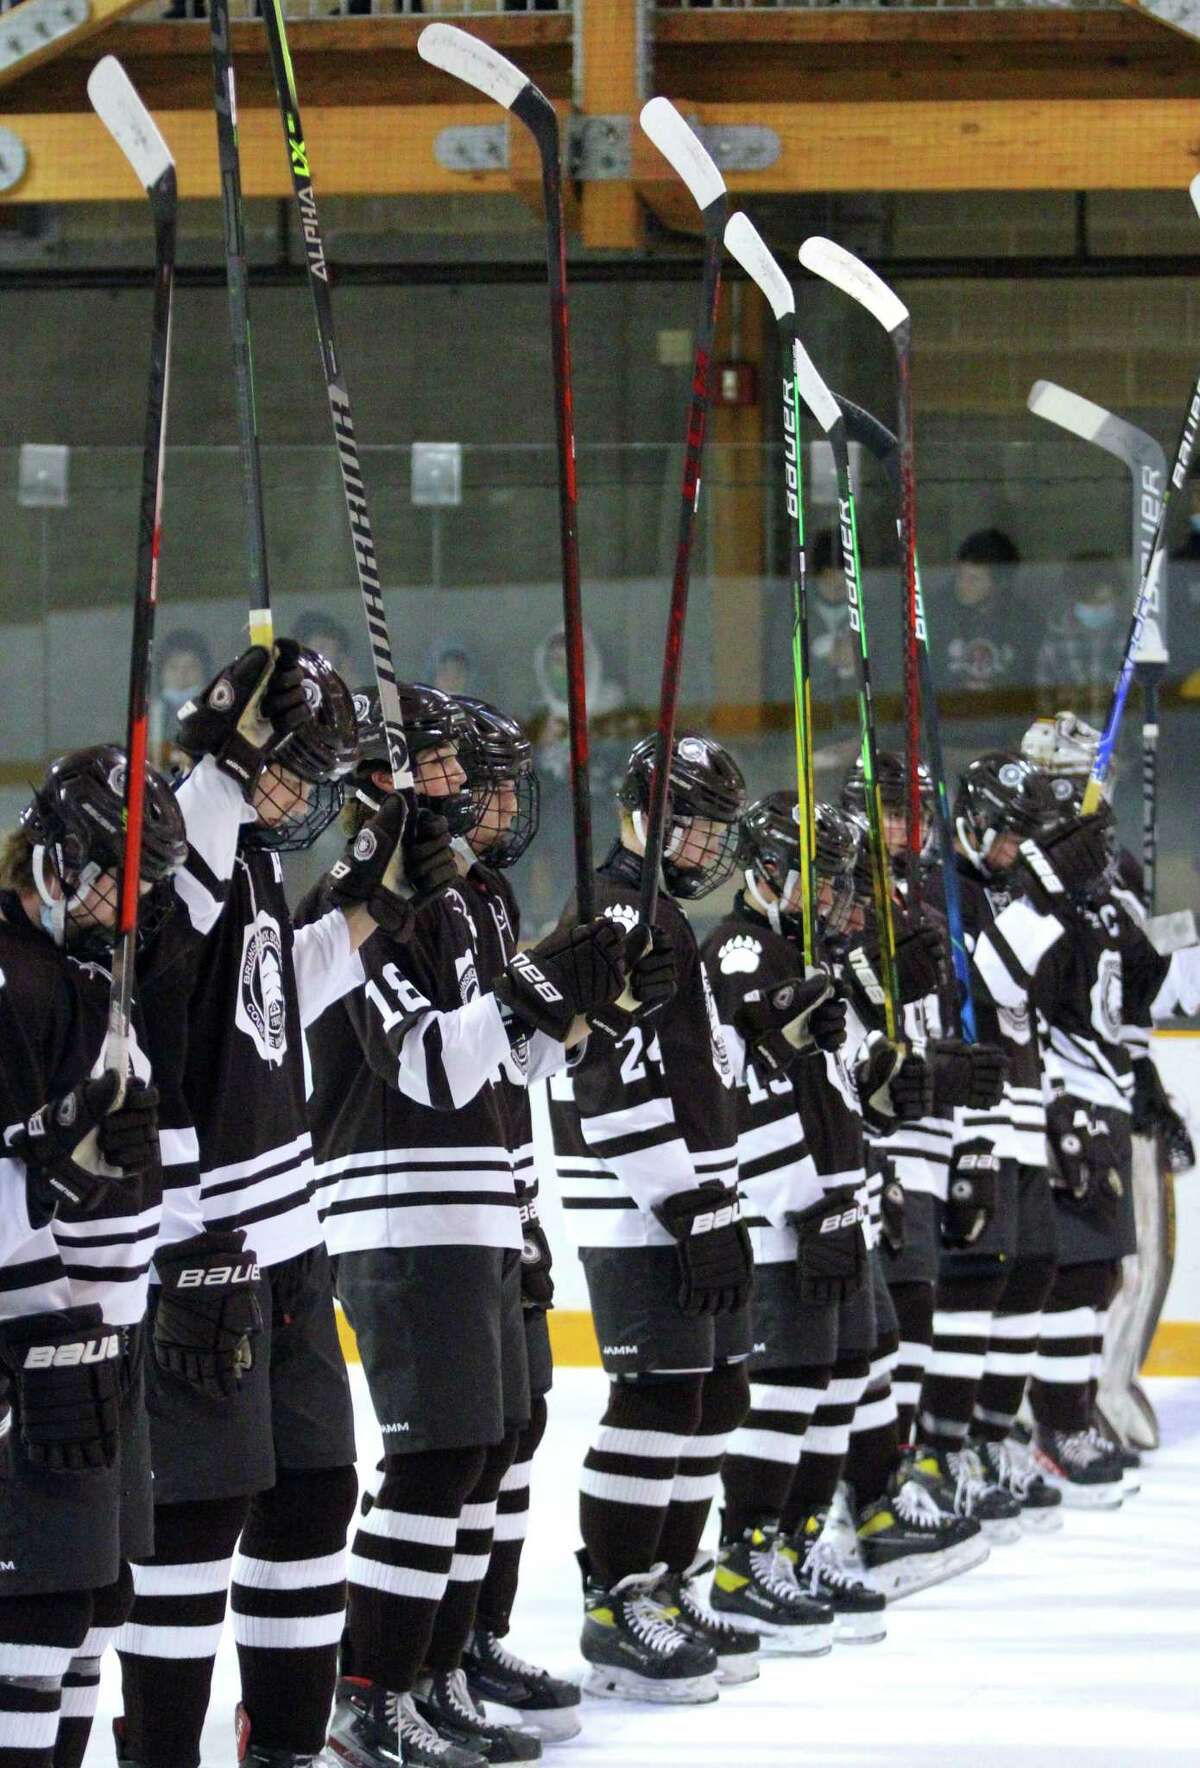 Brunswick hockey team players hold up their hockey sticks during a moment of silence before a game against Millbrook at Hartong Rink in Greenwich, Conn., on Wednesday Jan. 12, 2021. The moment of silence was held in memory of St. Luke's Teddy Balkind, who died Thursday at rink in a junior varsity game against Brunswick.